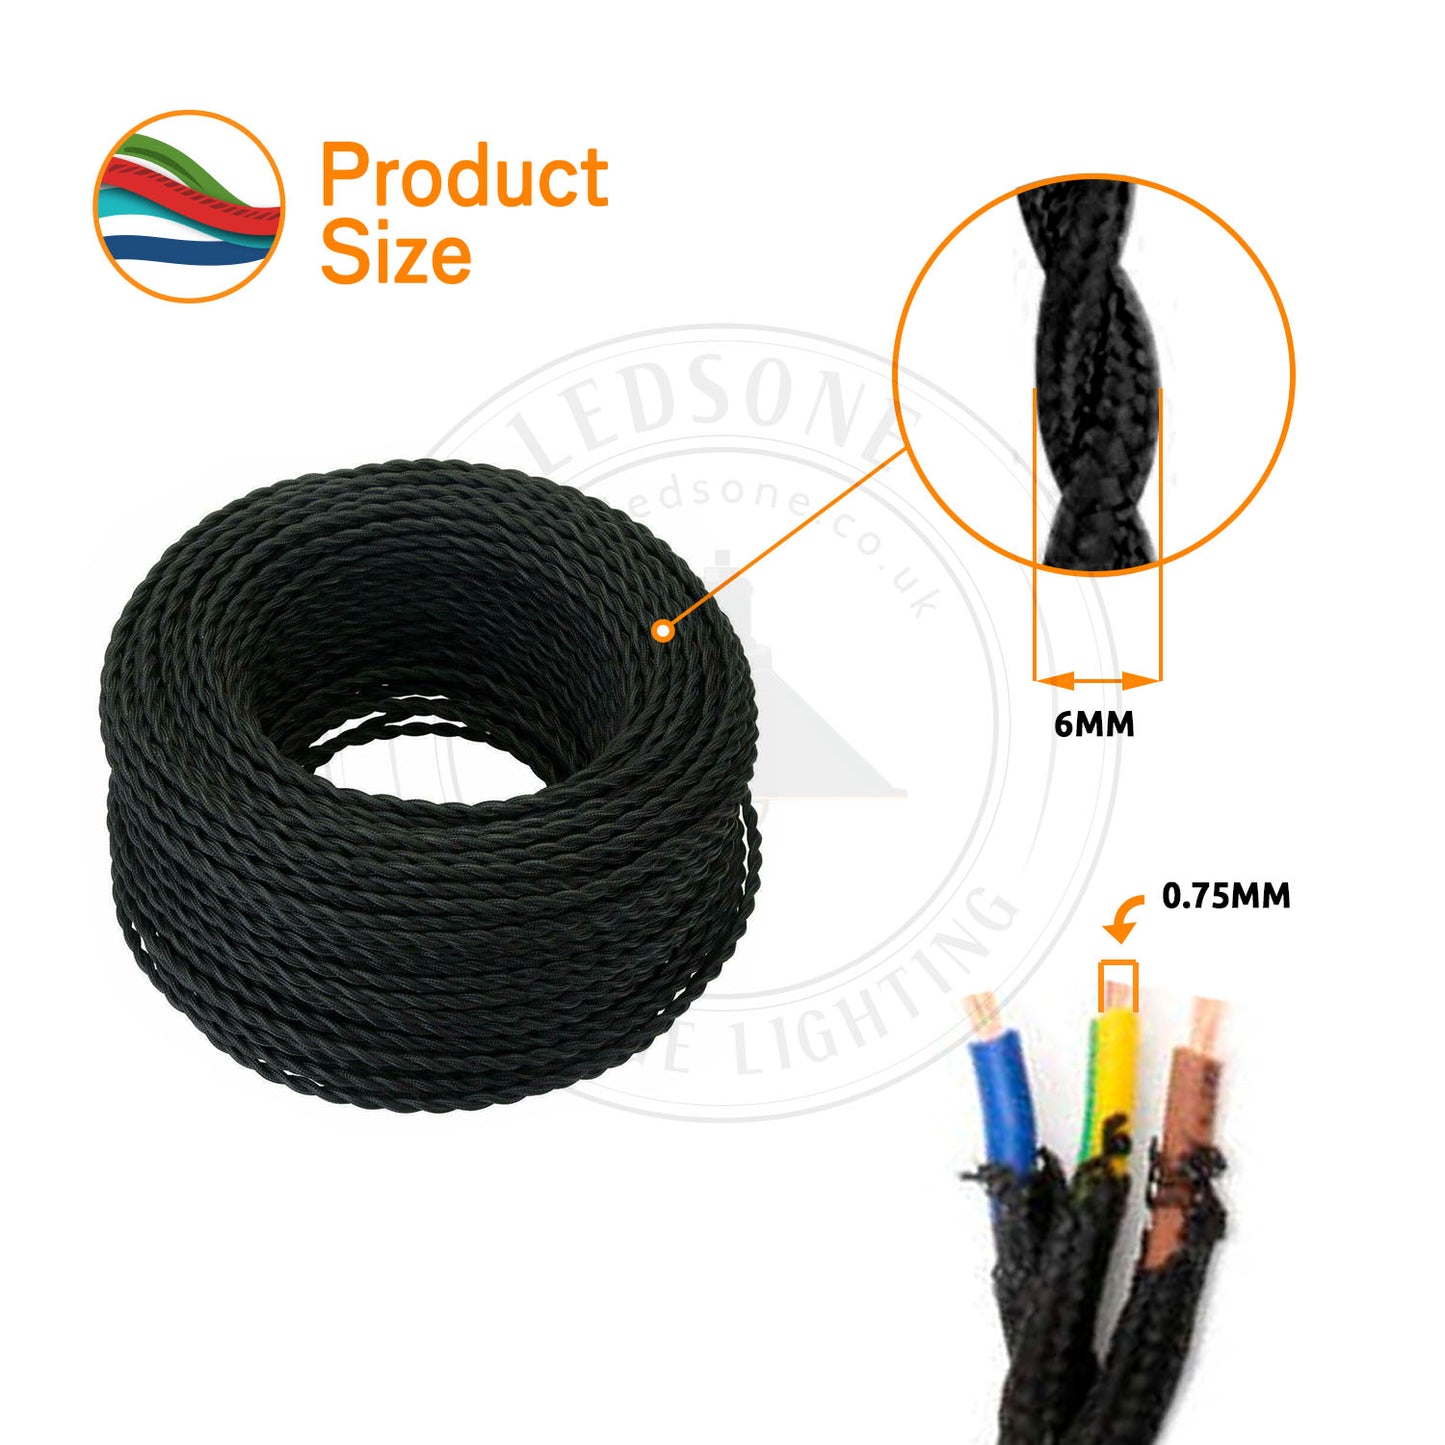 18 Gauge 3 Conductor Twisted Cloth Covered Wire Braided Light Cord Teak Black~1673